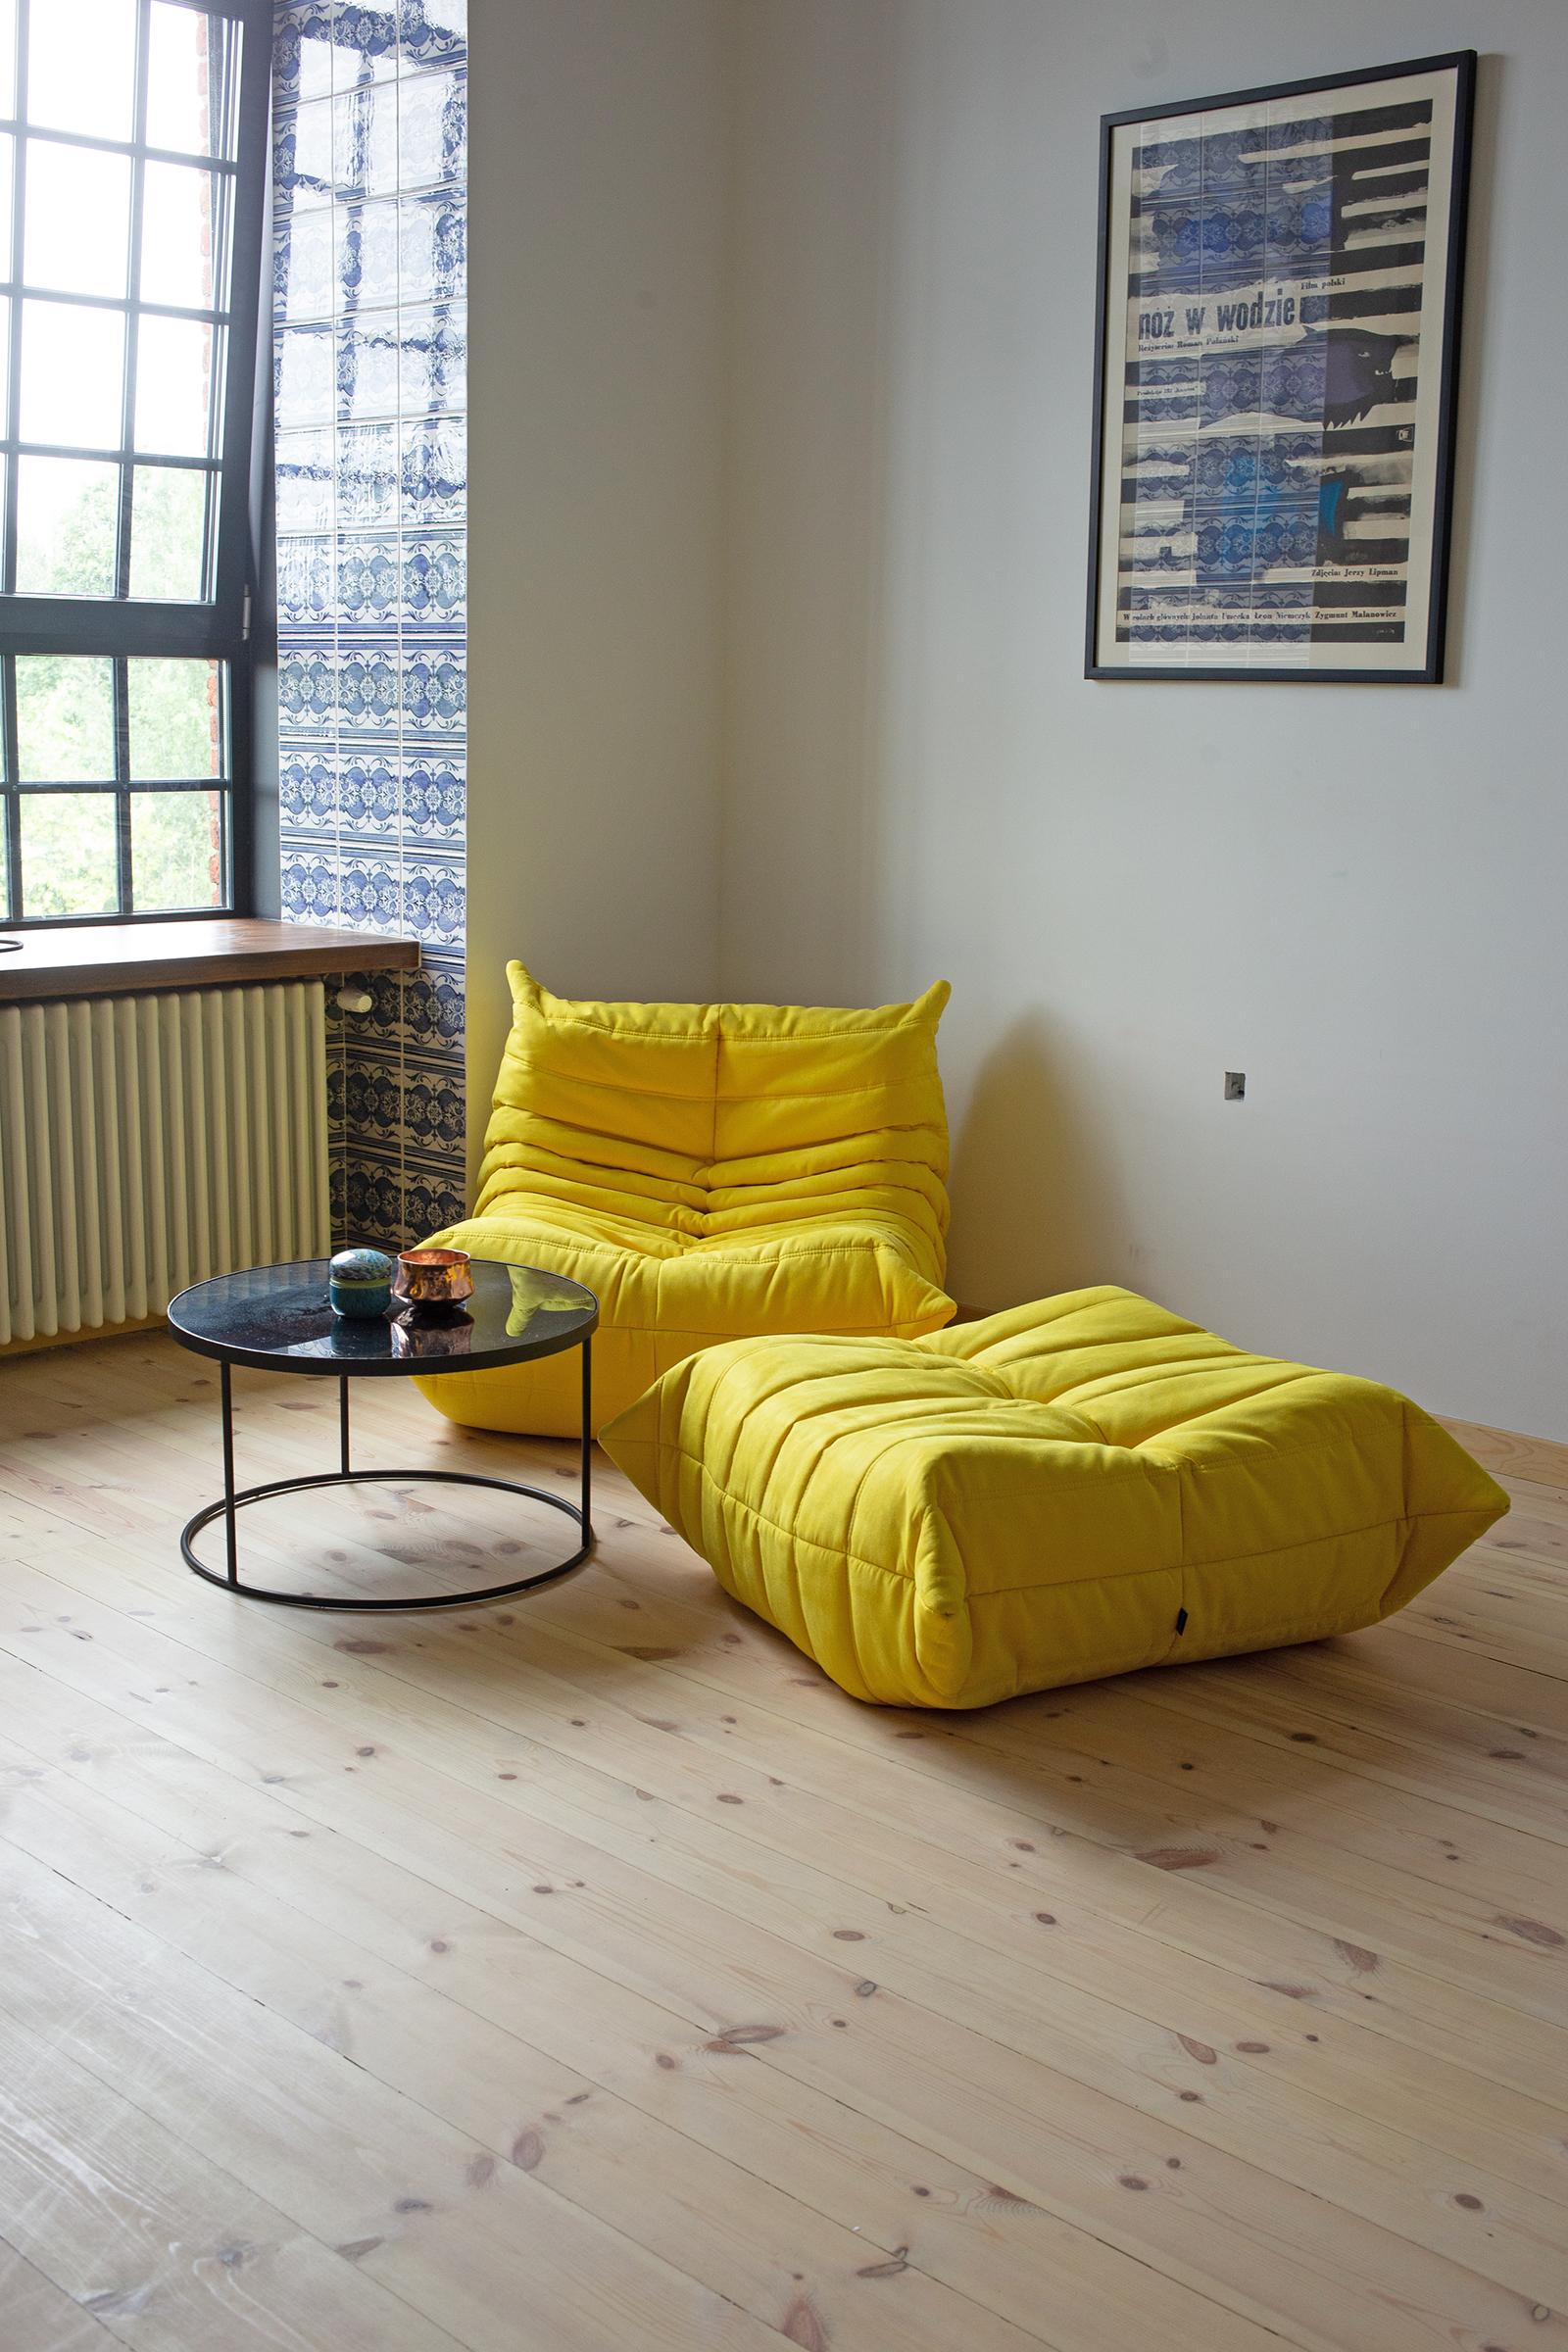 This Togo living room set was designed by Michel Ducaroy in 1973 and manufactured by Ligne Roset in France. It has been reupholstered in yellow high quality microfiber and is made up of the following pieces, each with the original Ligne Roset logo